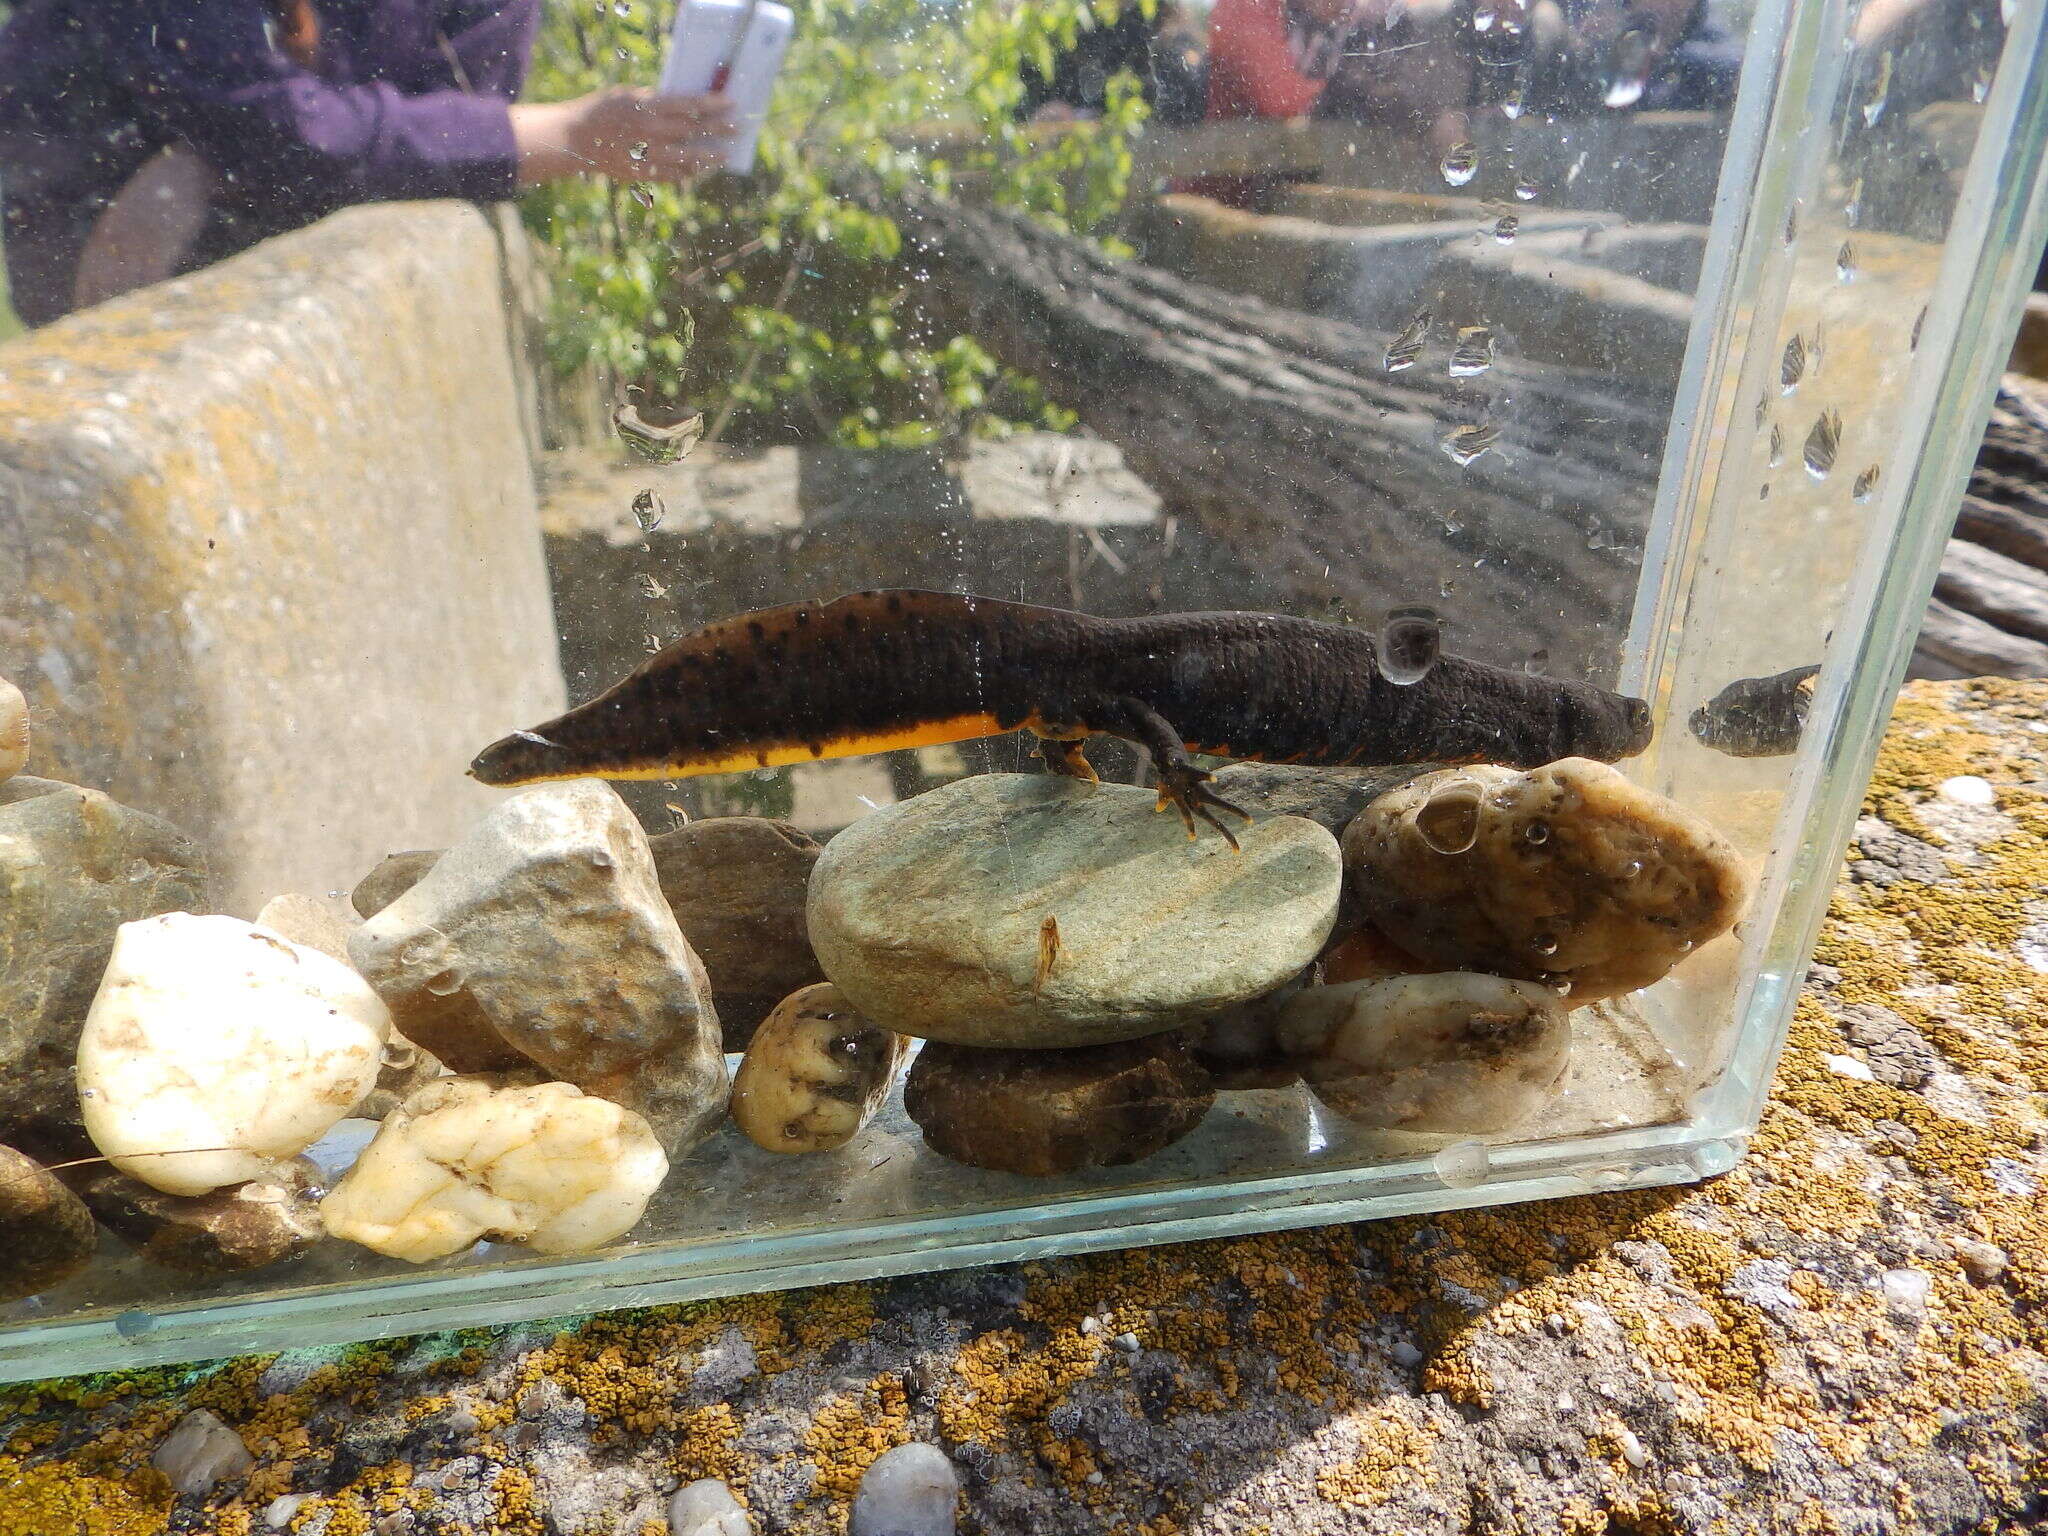 Image of Danube Crested Newt